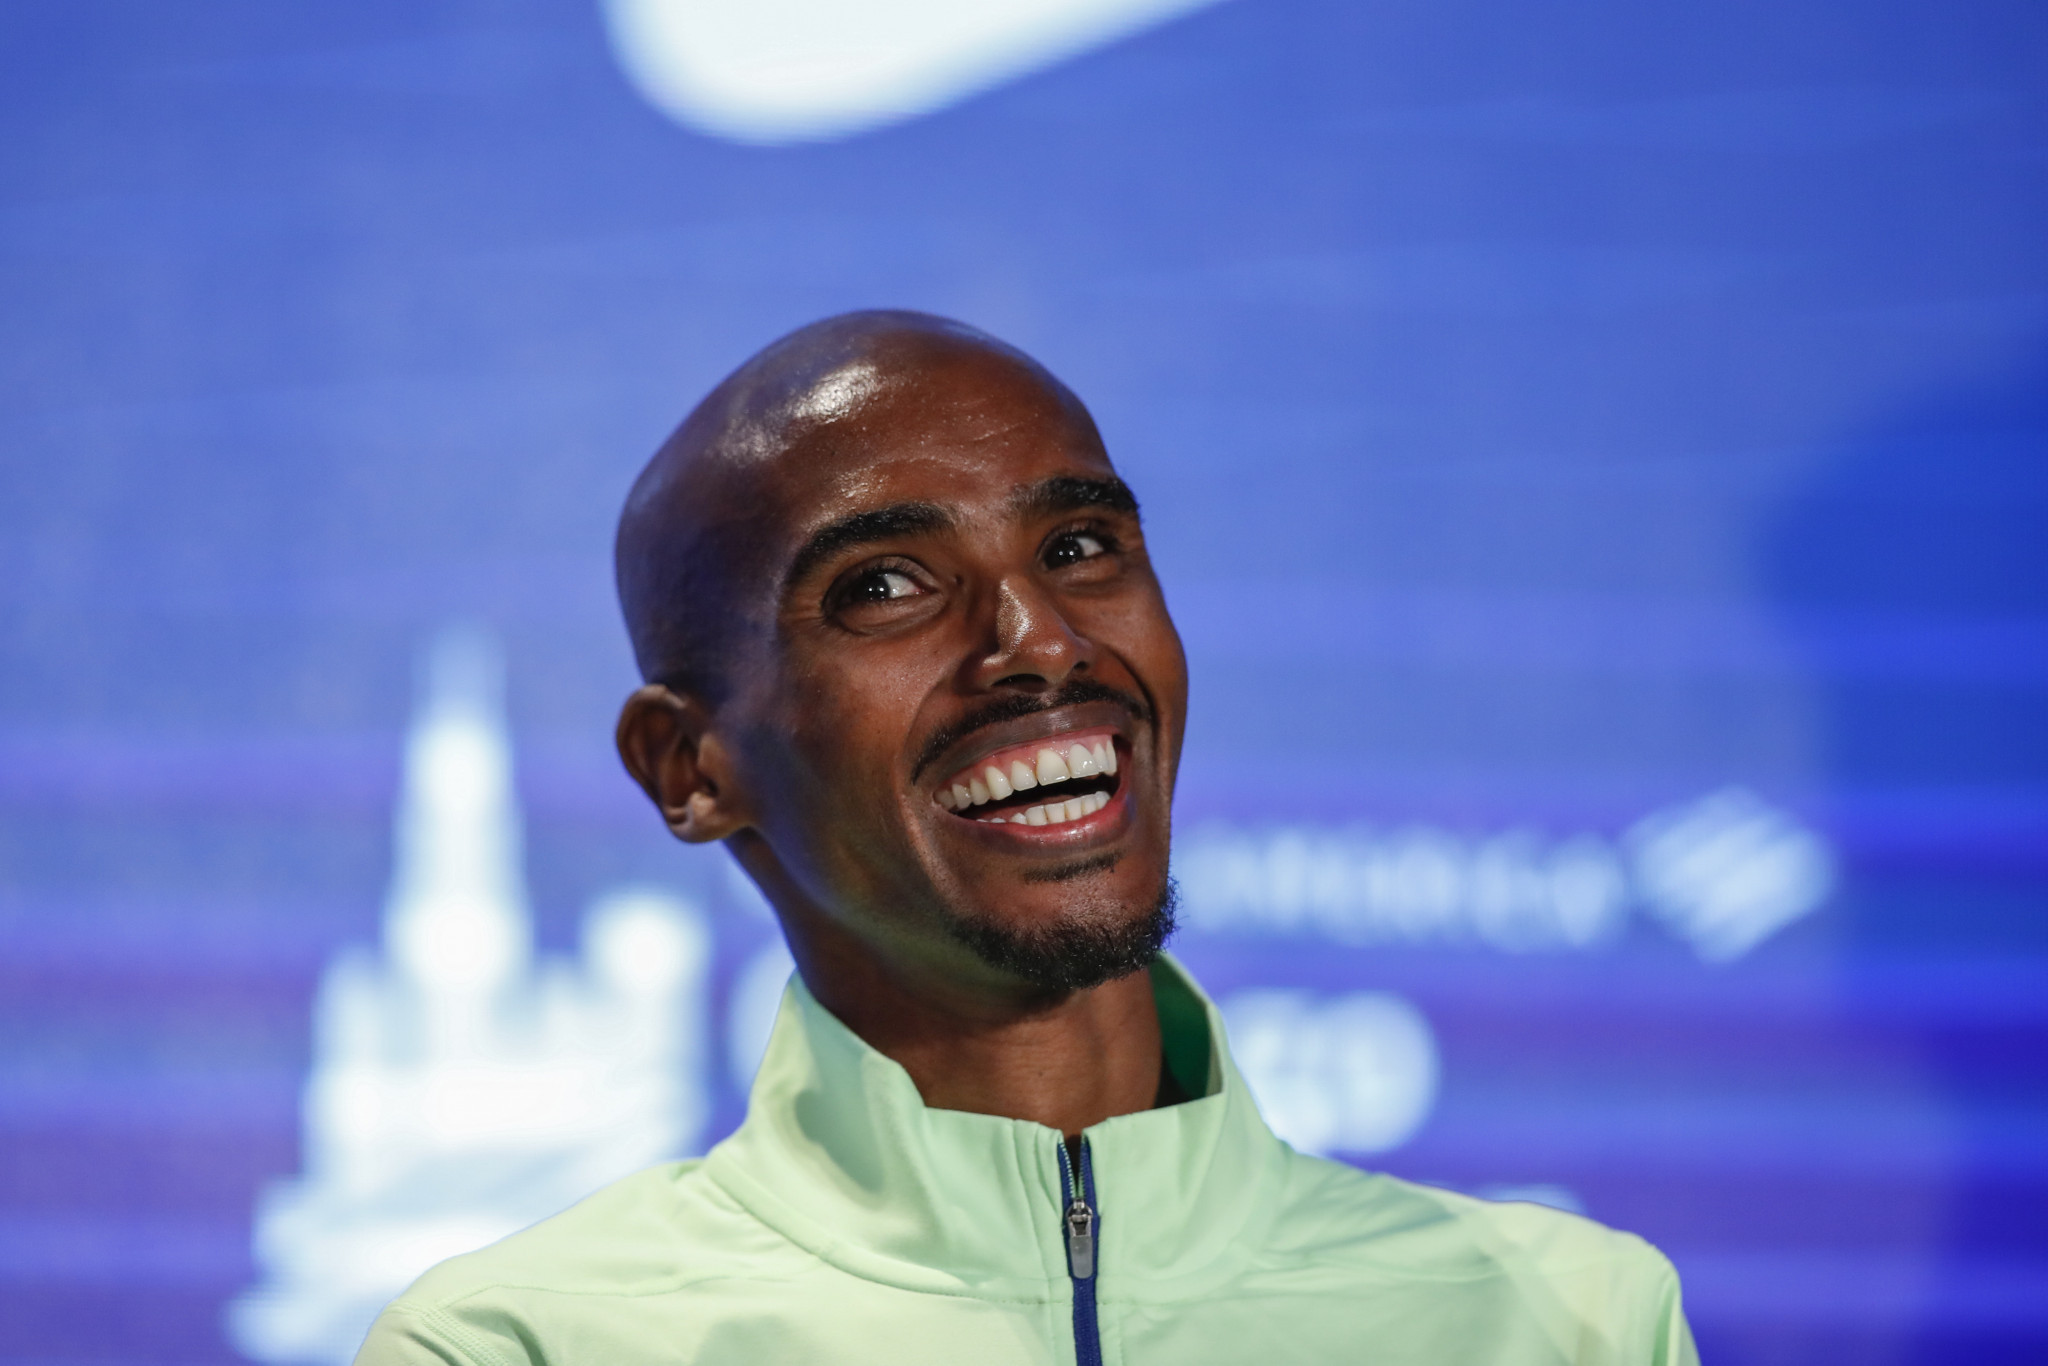 Sir Mo Farah has admitted the postponement of Tokyo 2020 by 12 months could help his chances of more medals on the track ©Getty Images